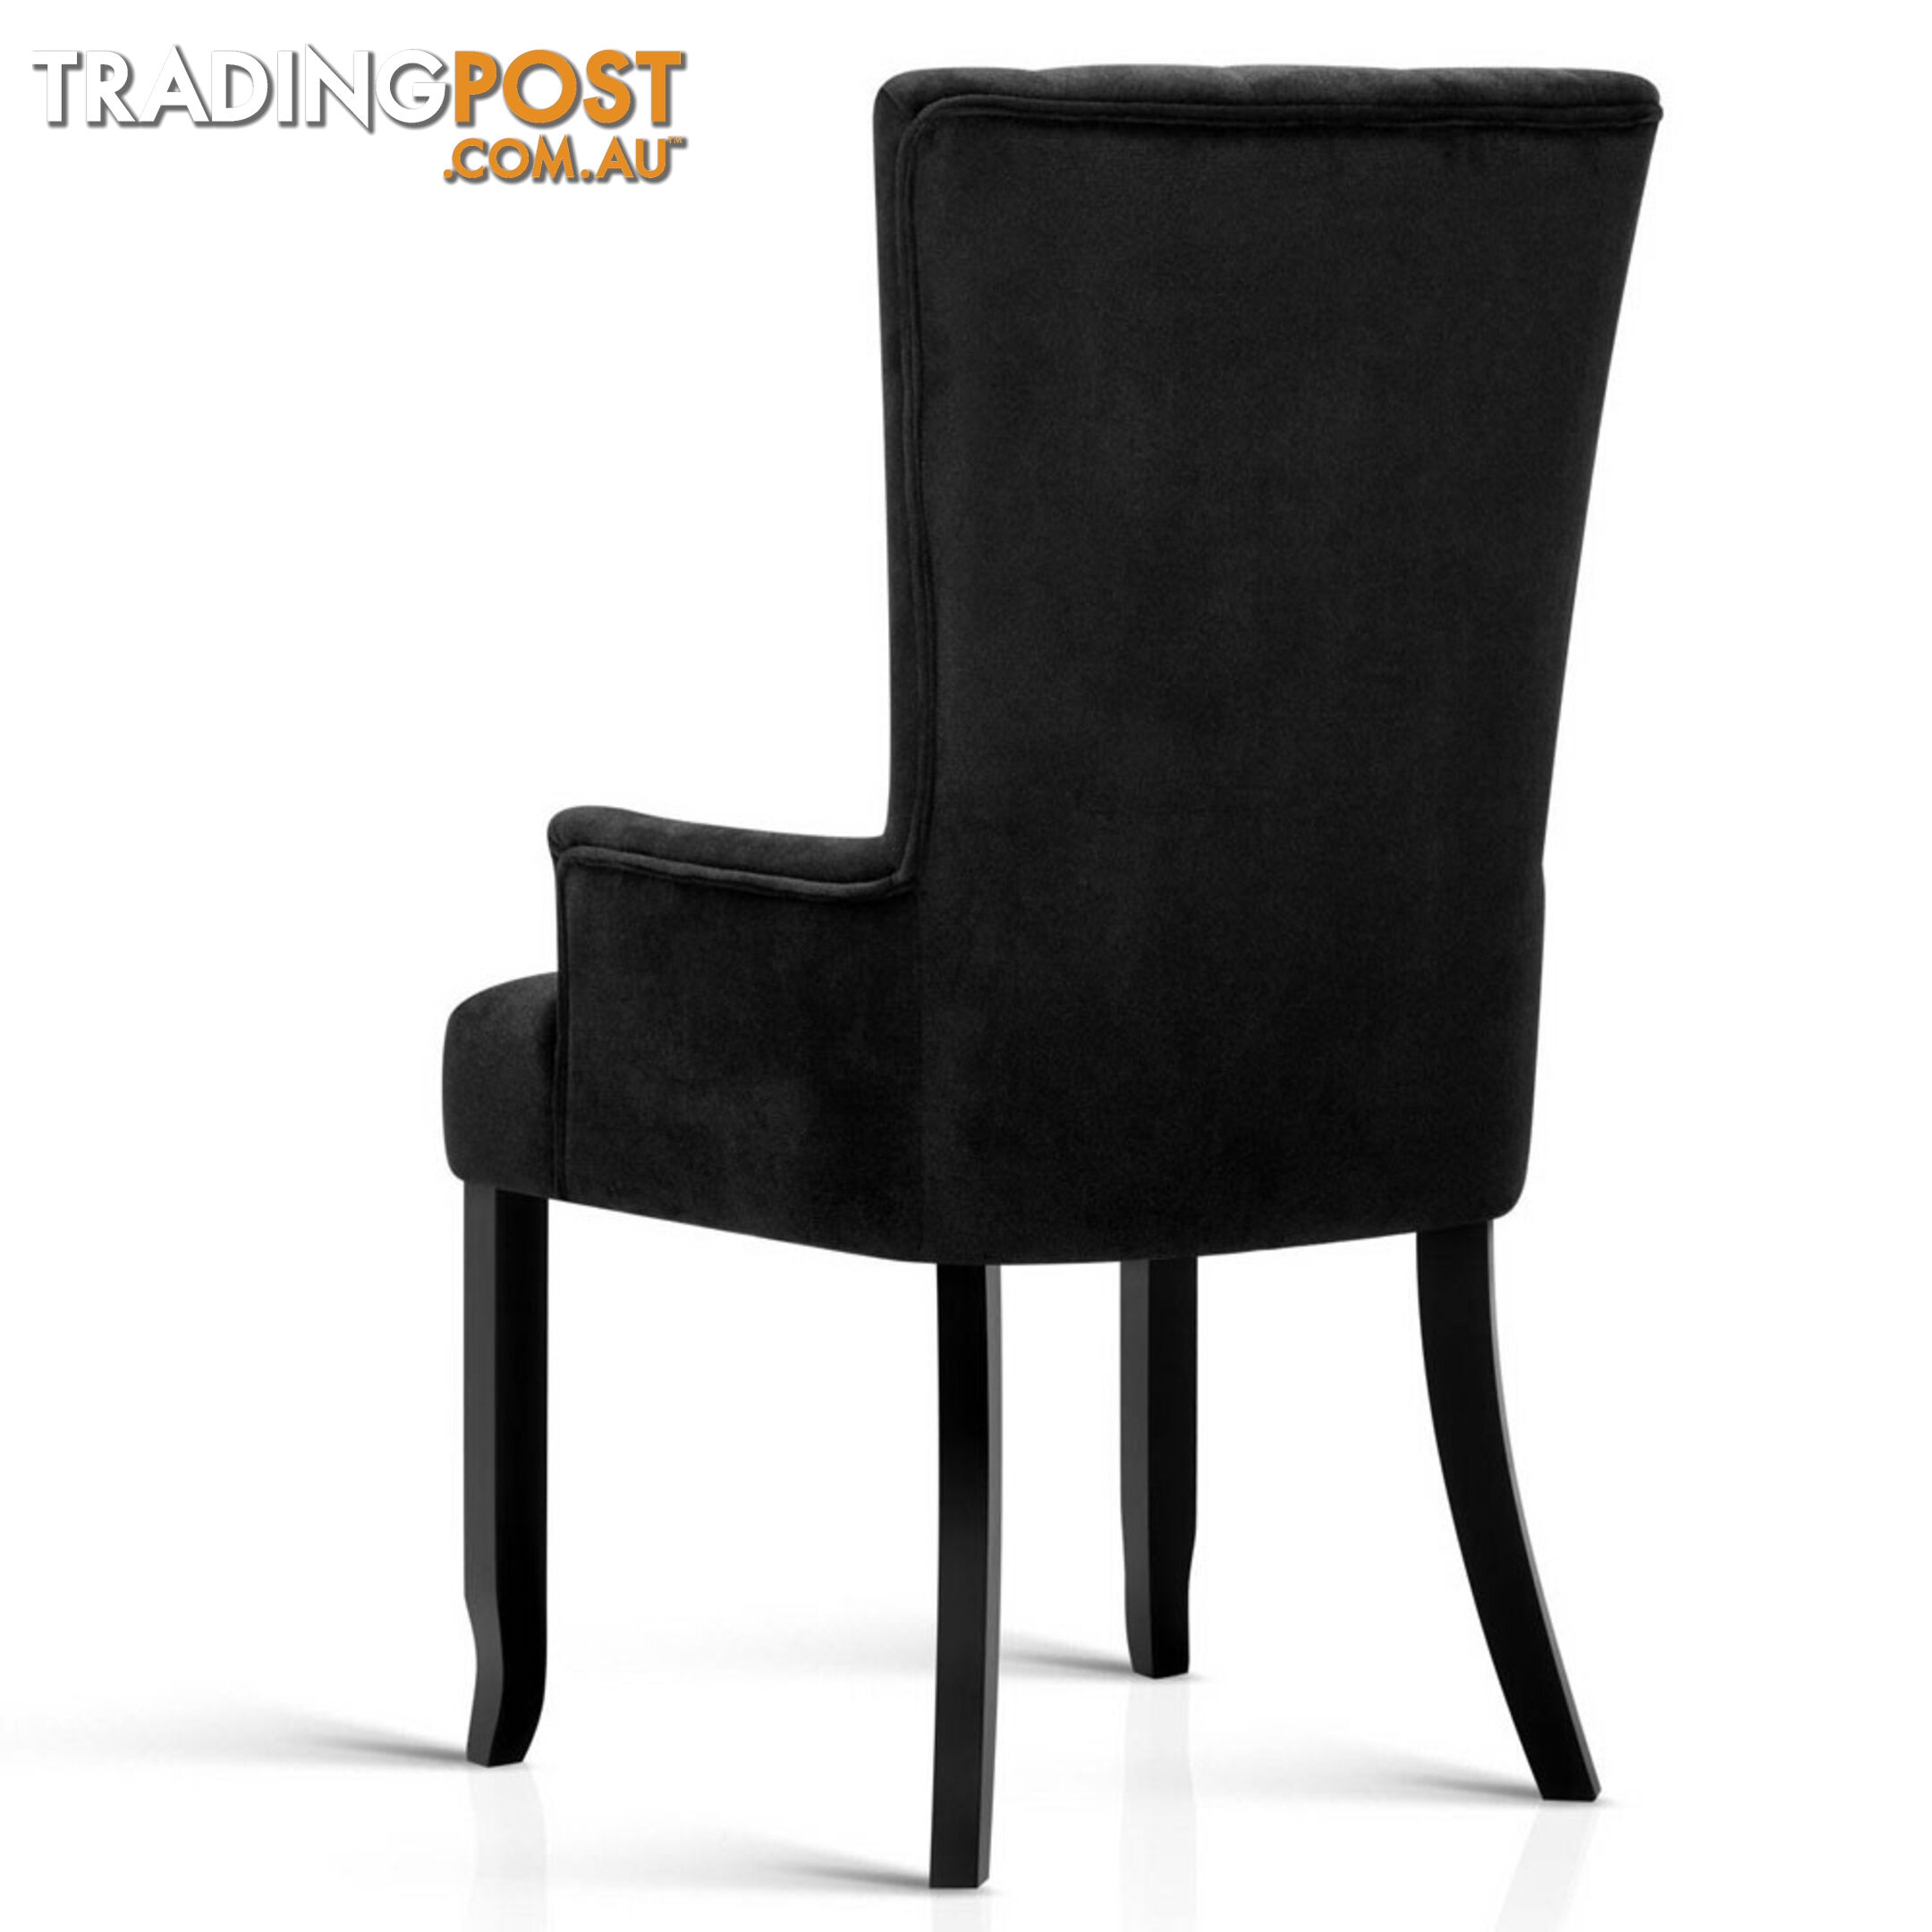 French Provincial Dining Chair - Black